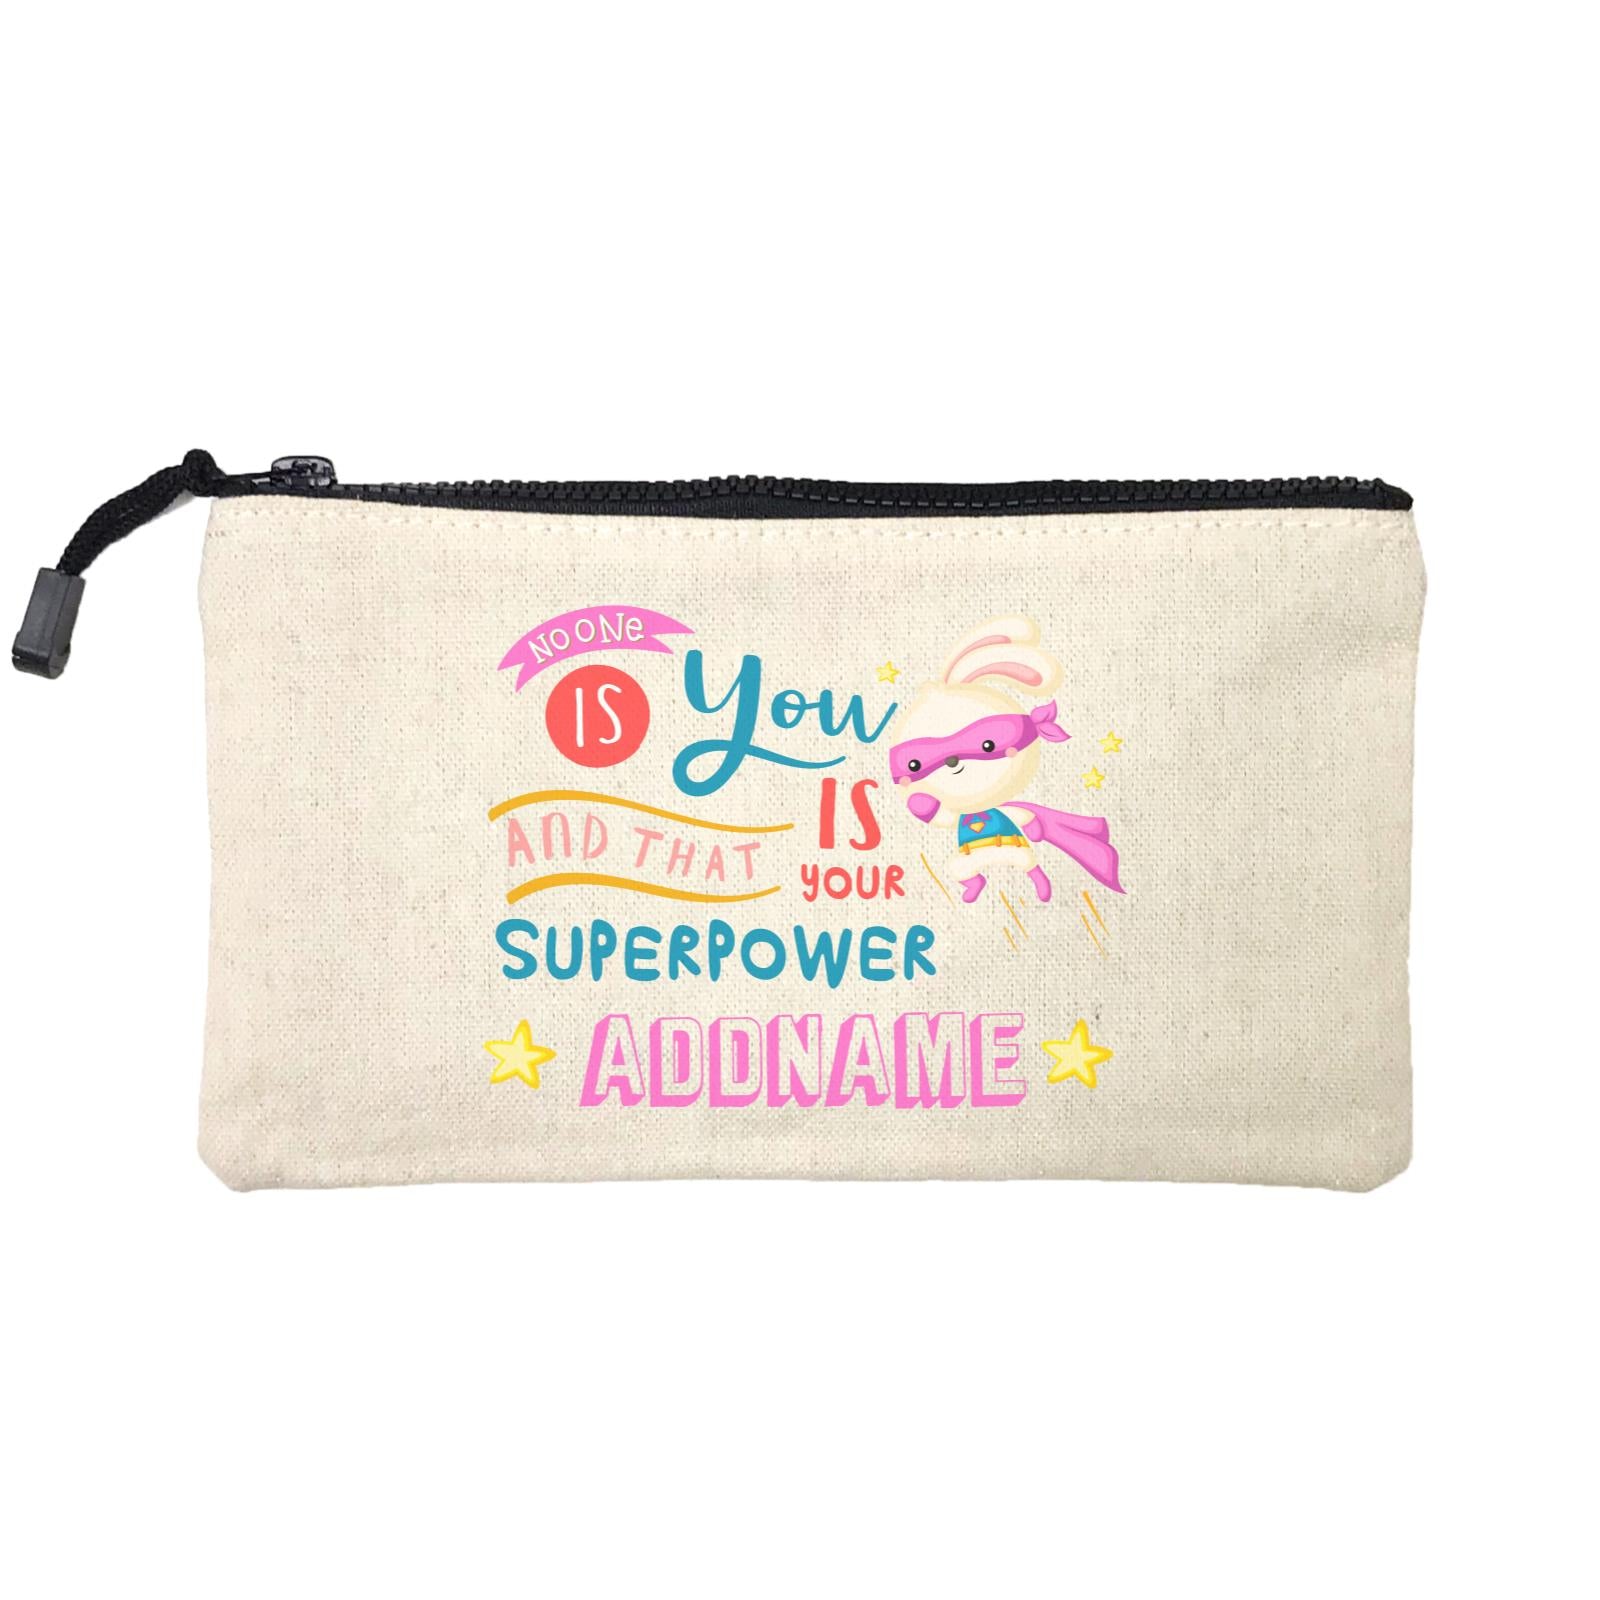 Children's Day Gift Series No One Is You And That Is Your Superpower Pink Addname SP Stationery Pouch